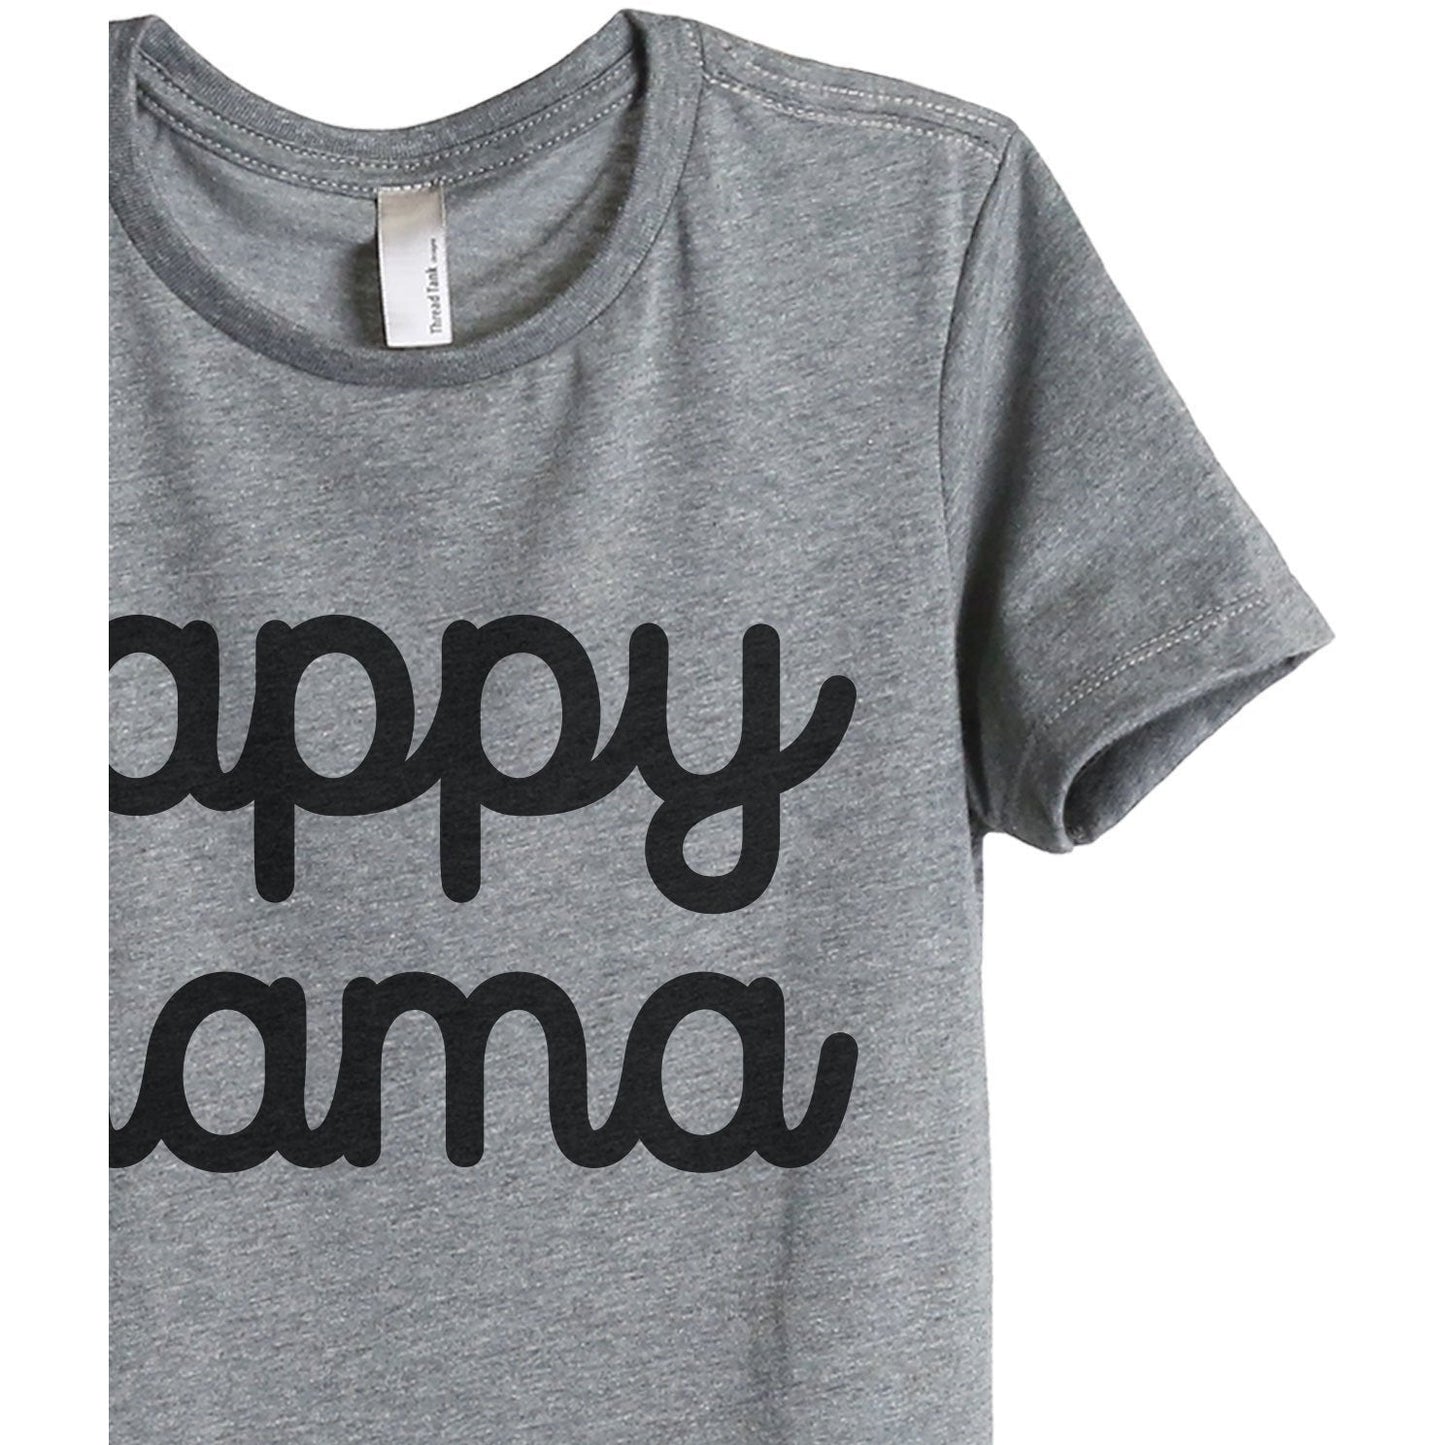 Happy Mama Women's Relaxed Crewneck T-Shirt Top Tee Heather Grey Zoom Details
